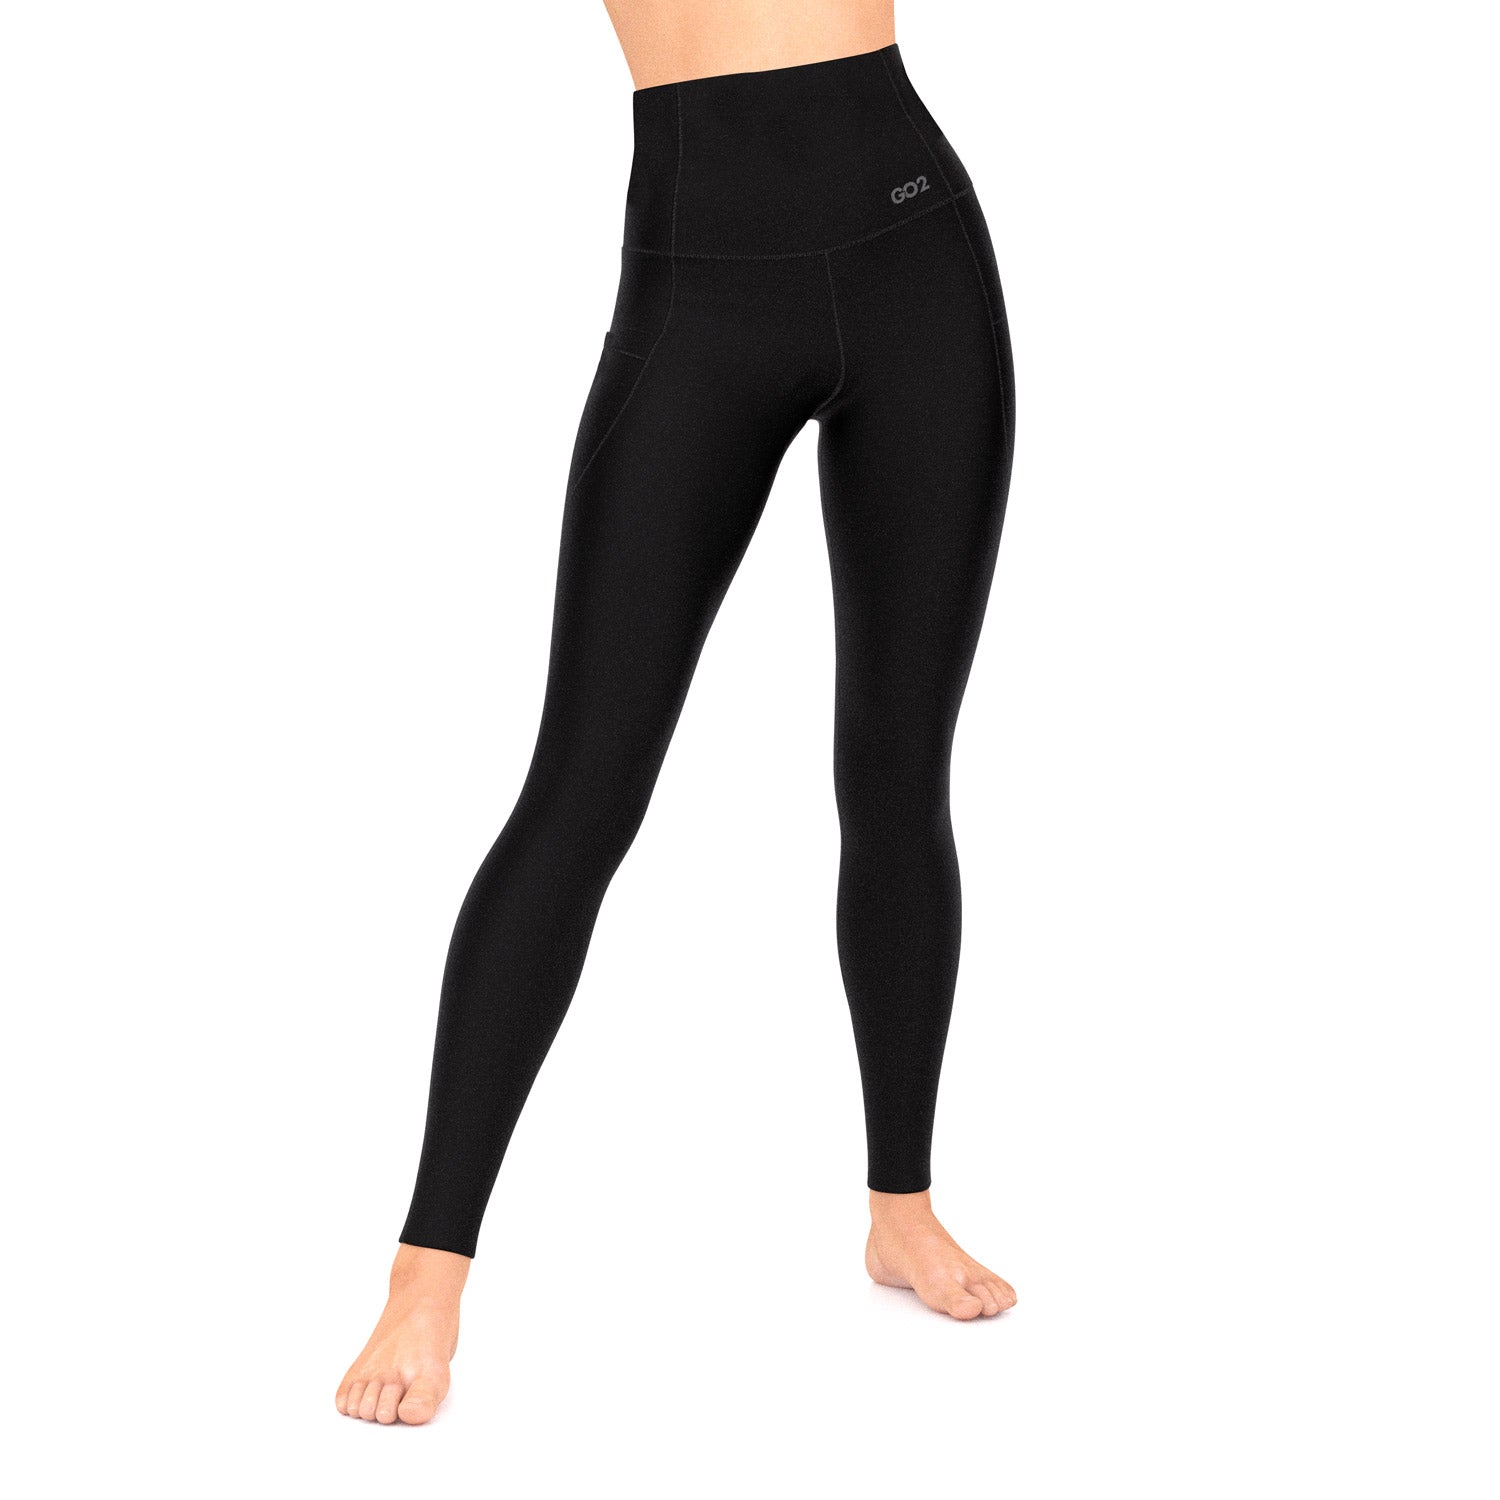 Buy Women s Compression Pants - Best Full Leggings Tights for Running Yoga  Gym by CompressionZ Black Medium at